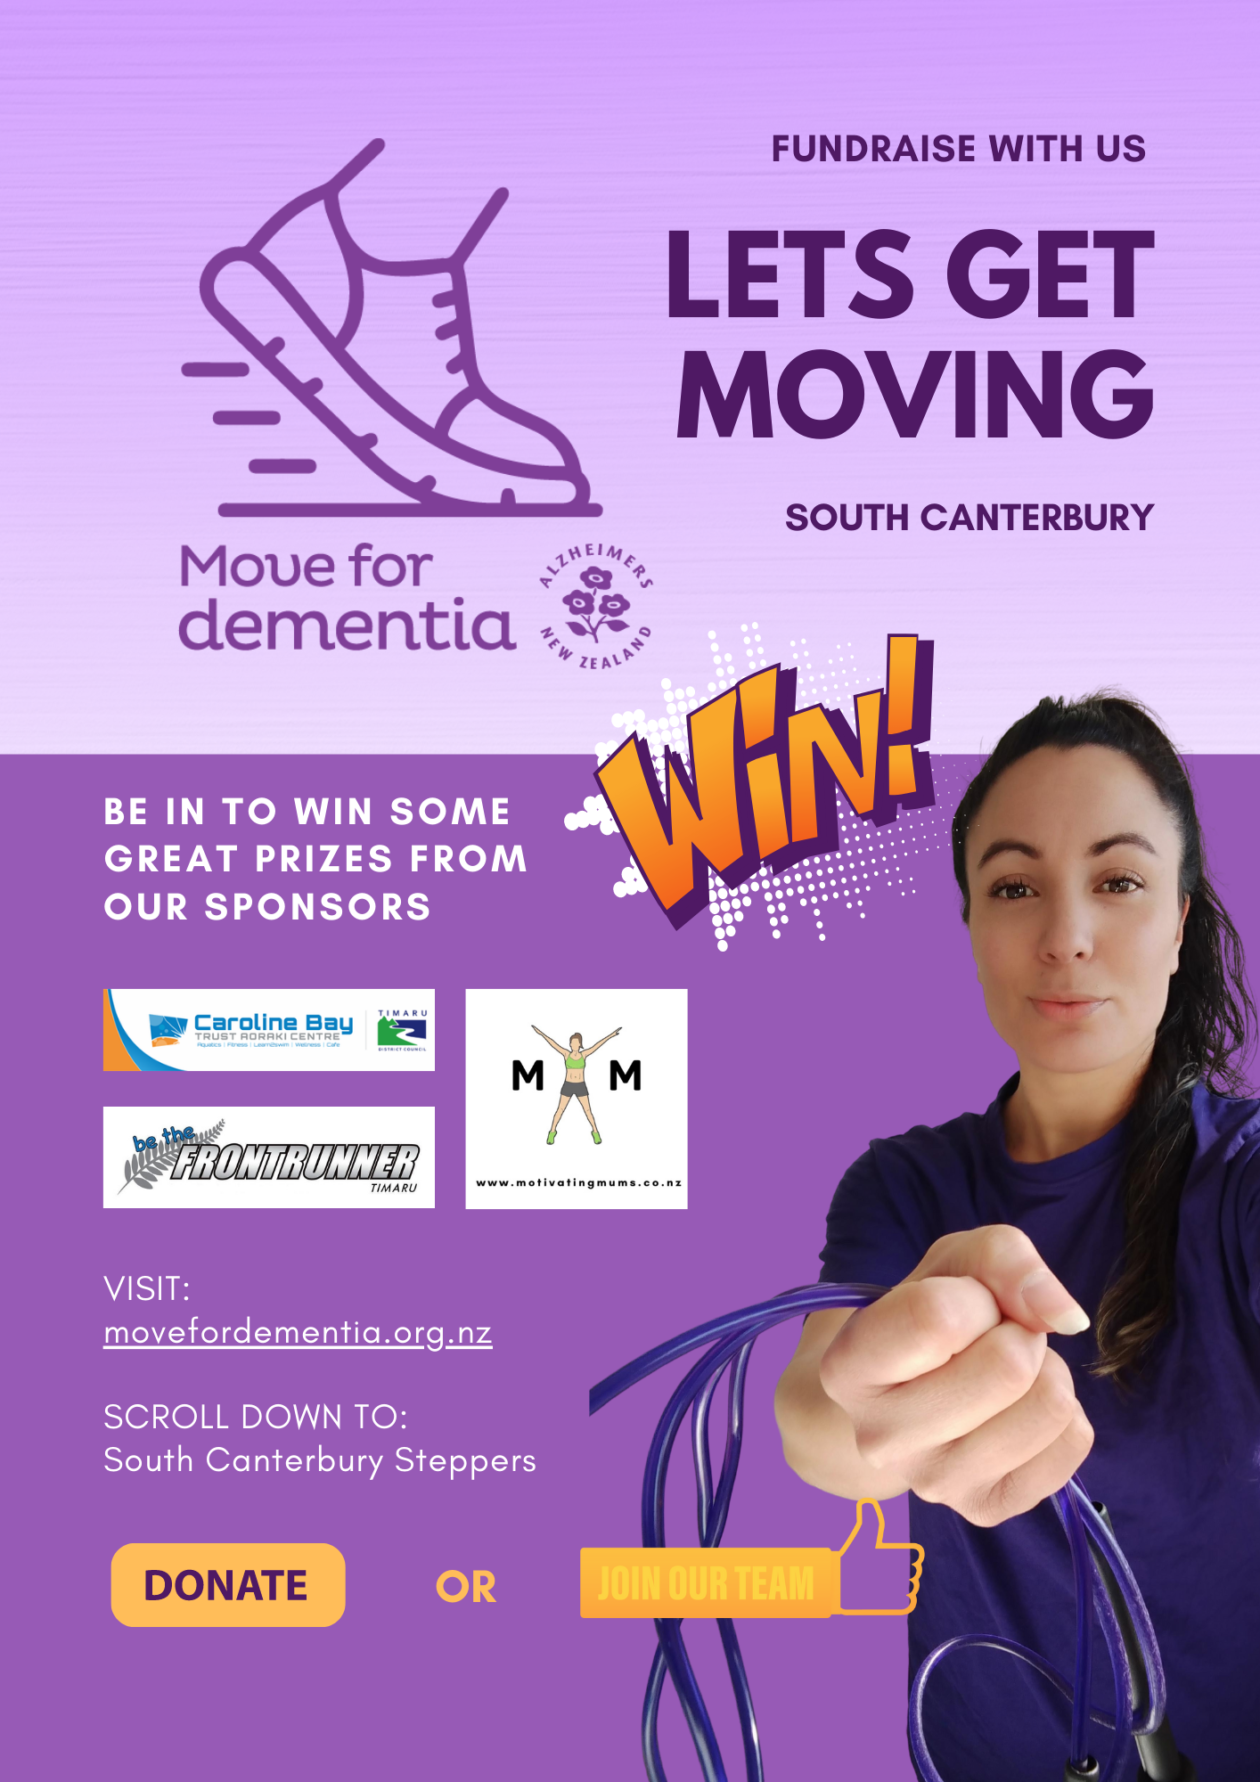 a women wearing purple holding out a purple skipping rope. Inviting readers to join our Move for Dementia fundraising campaign